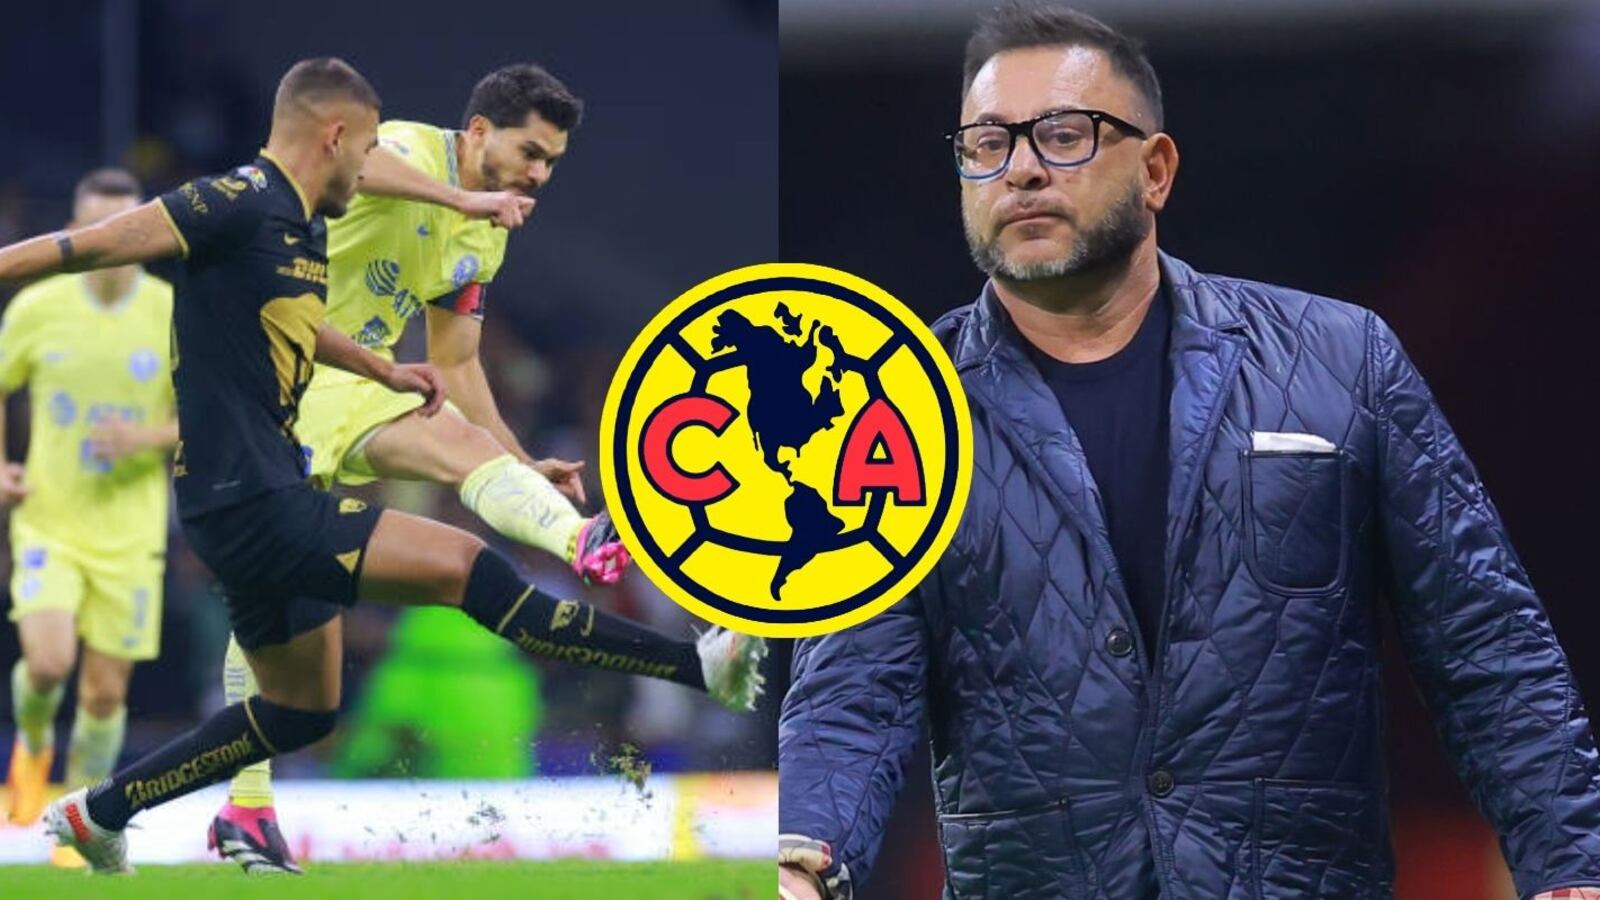 Mohamed was not only expelled, this is how he mocked Club América